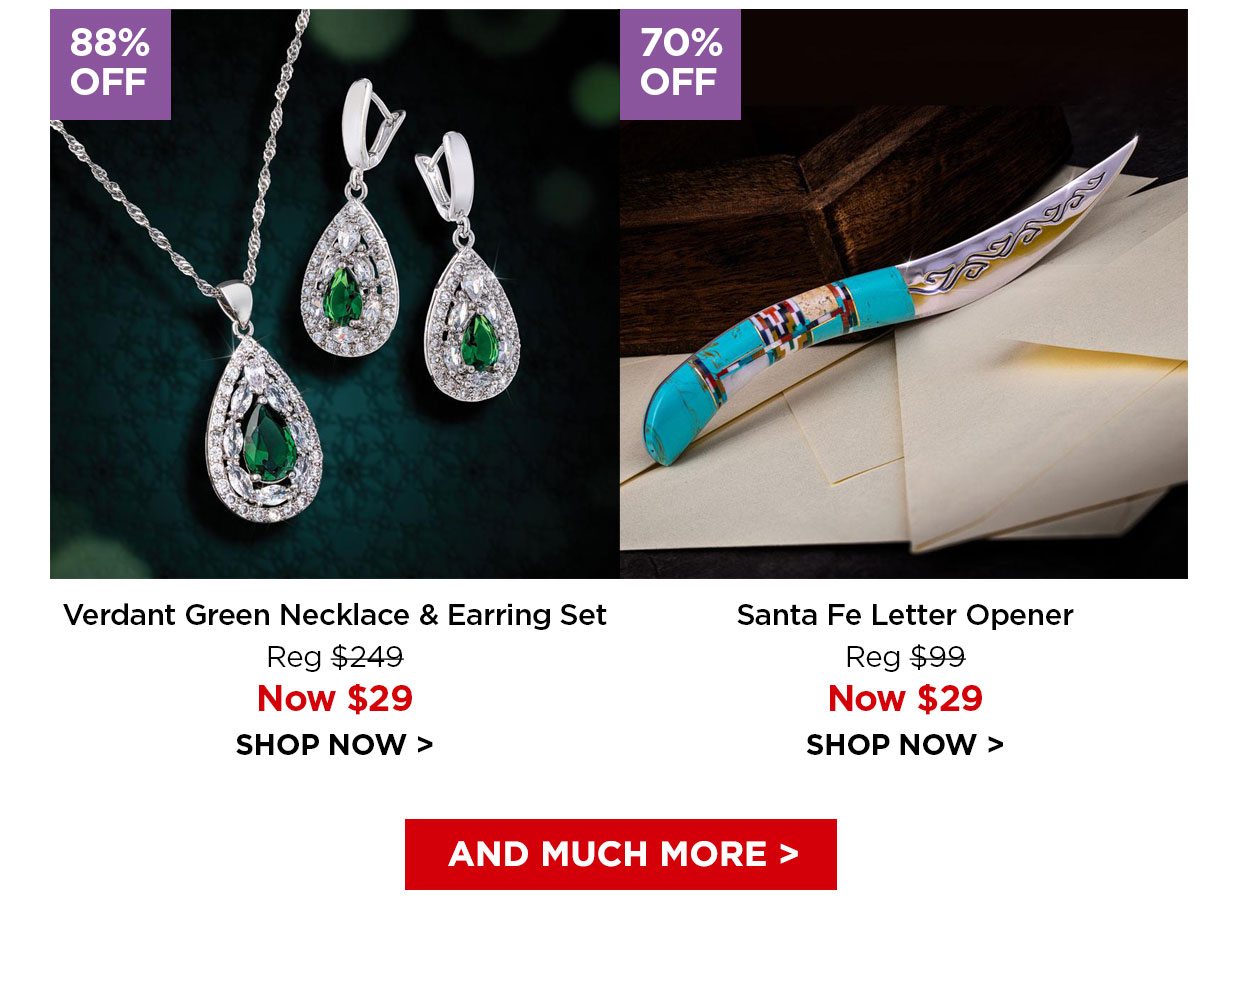 88% off. Verdant Green Necklace & Earring Set Reg $249, Now $29. 70% off. Santa Fe Letter Opener Reg $99, Now $29. And Much More link.